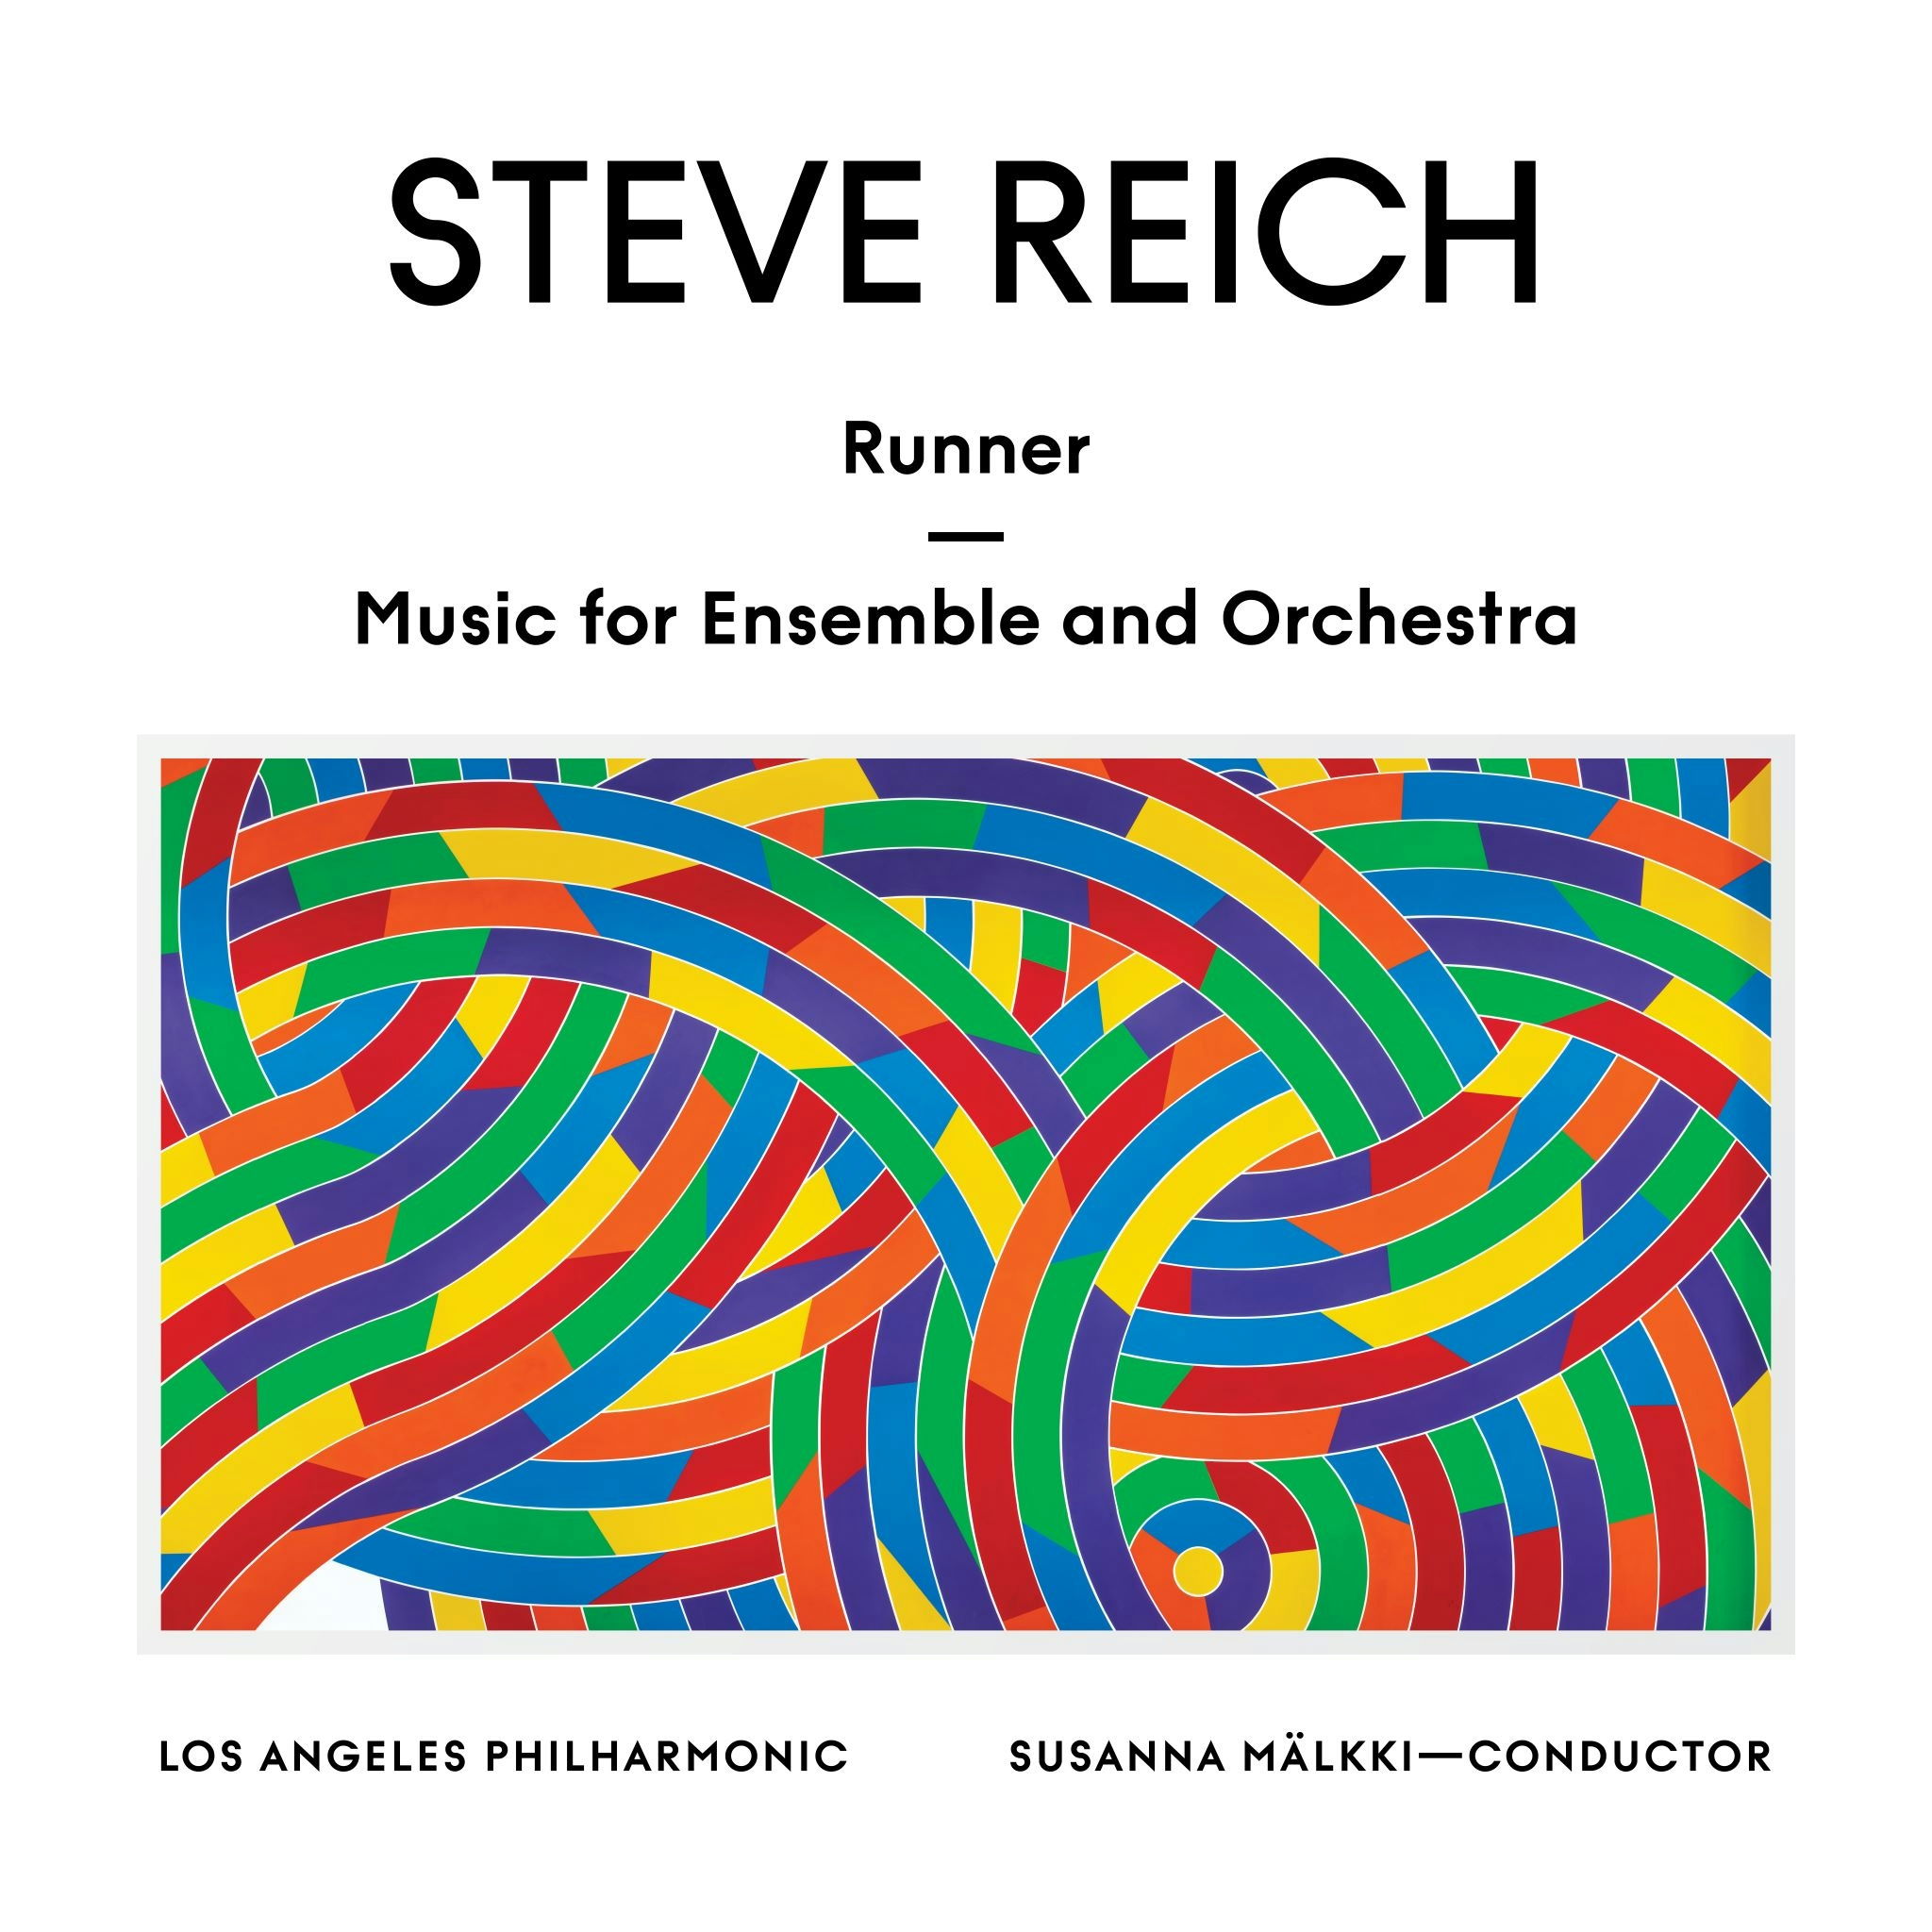 Album artwork for Steve Reich: Runner / Music for Ensemble and Orchestra by Los Angeles Philharmonic and Susanna Mälkki